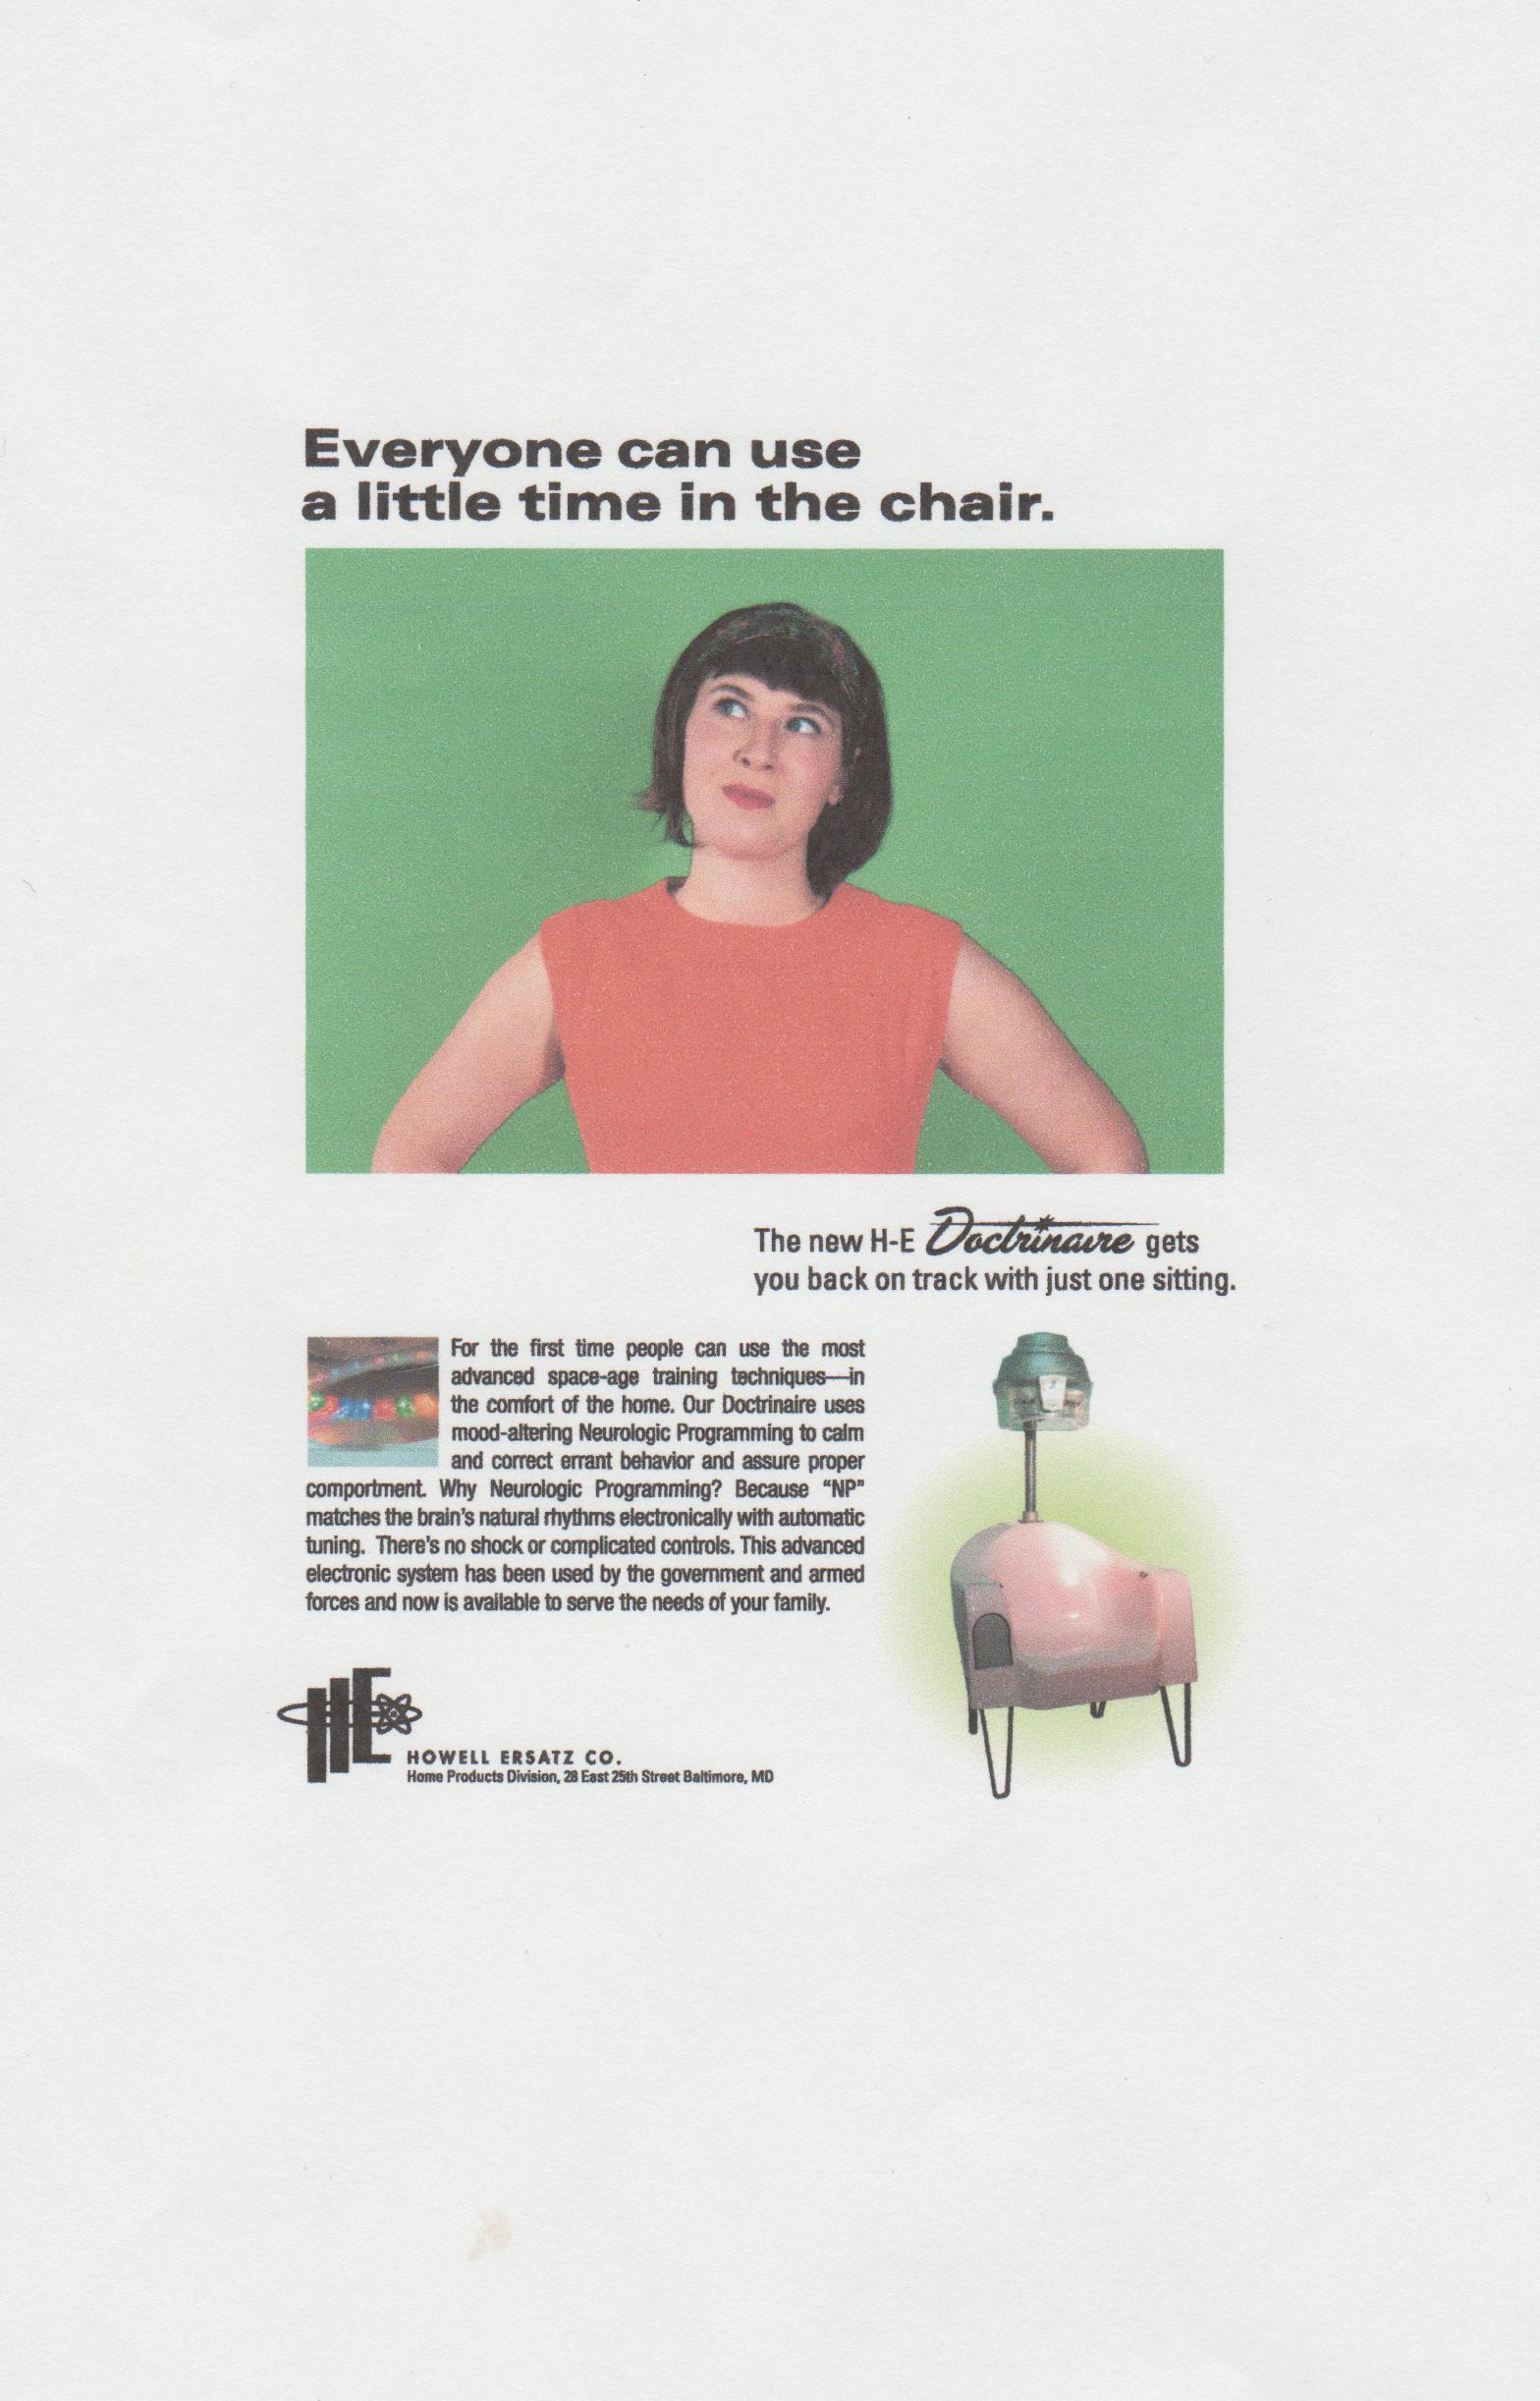 Magazine ad suggesting “A little time in the chair”